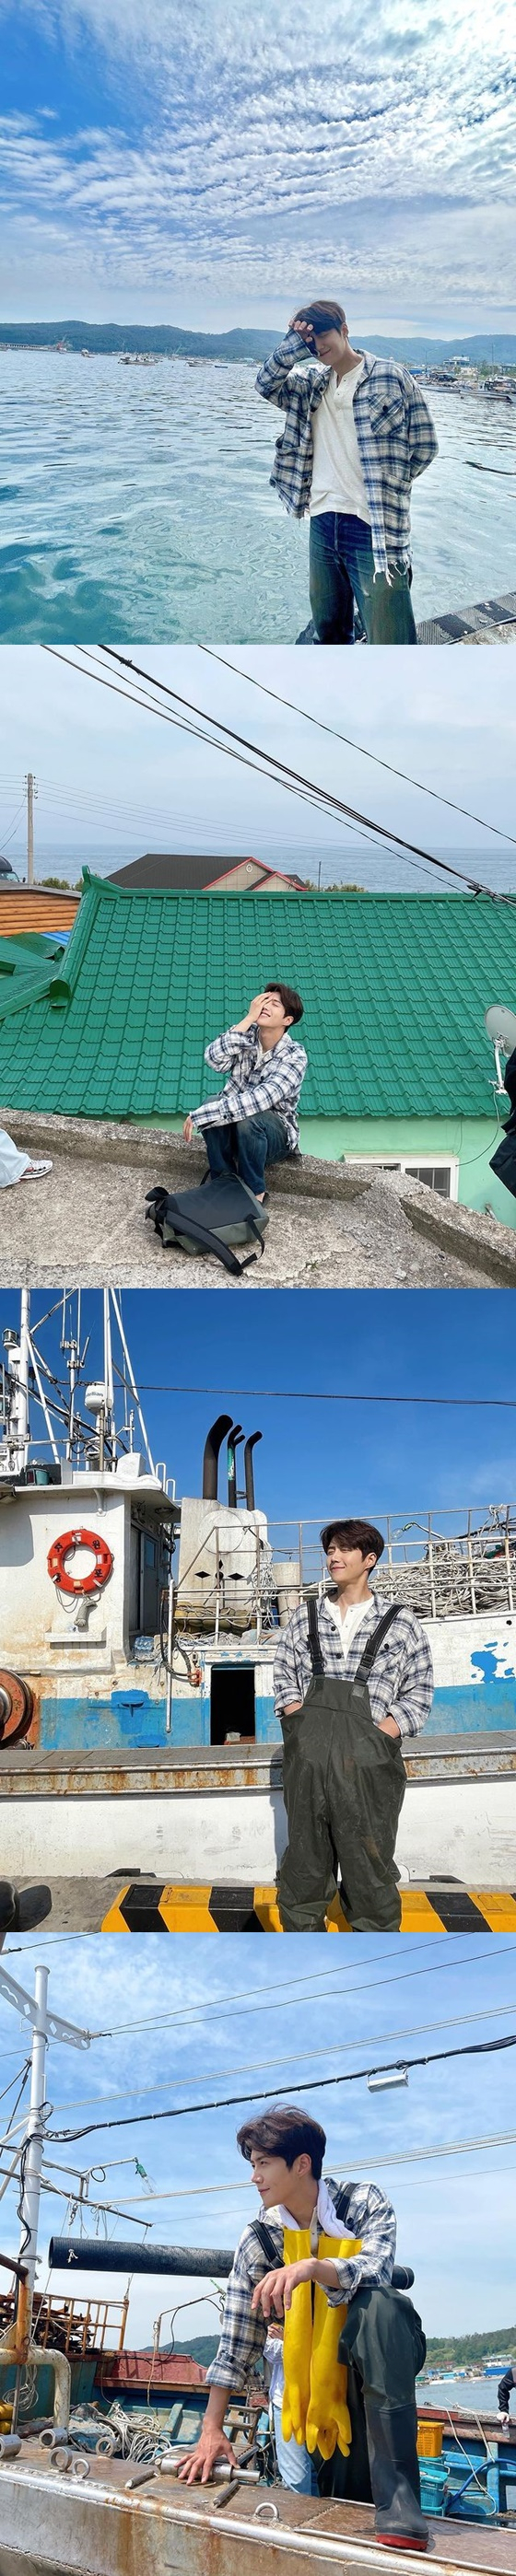 Kim Seon-ho posted several photos on his instagram on the 28th, along with an article entitled #Hometown Cha-Cha-Cha First Broadcasting! 9 pm # Shake tonight.Kim Seon-ho in the public photo boasts a cuteness in the background of the clean sea and sky.This appears to have been taken during the filming of Drama Hometown Cha-Cha-Cha.Meanwhile, Drama Hometown Cha-Cha-Cha-Cha starring Kim Seon-ho will be broadcast first this afternoon.Hometown Cha-Cha-Cha-Cha is a tikitaka healing romance in the sea village Resonance, which is filled with my people, woven by a realist dentist Yoon Hye-jin (Shin Min-ah) and a universal white-water erythema (Kim Seon-ho).